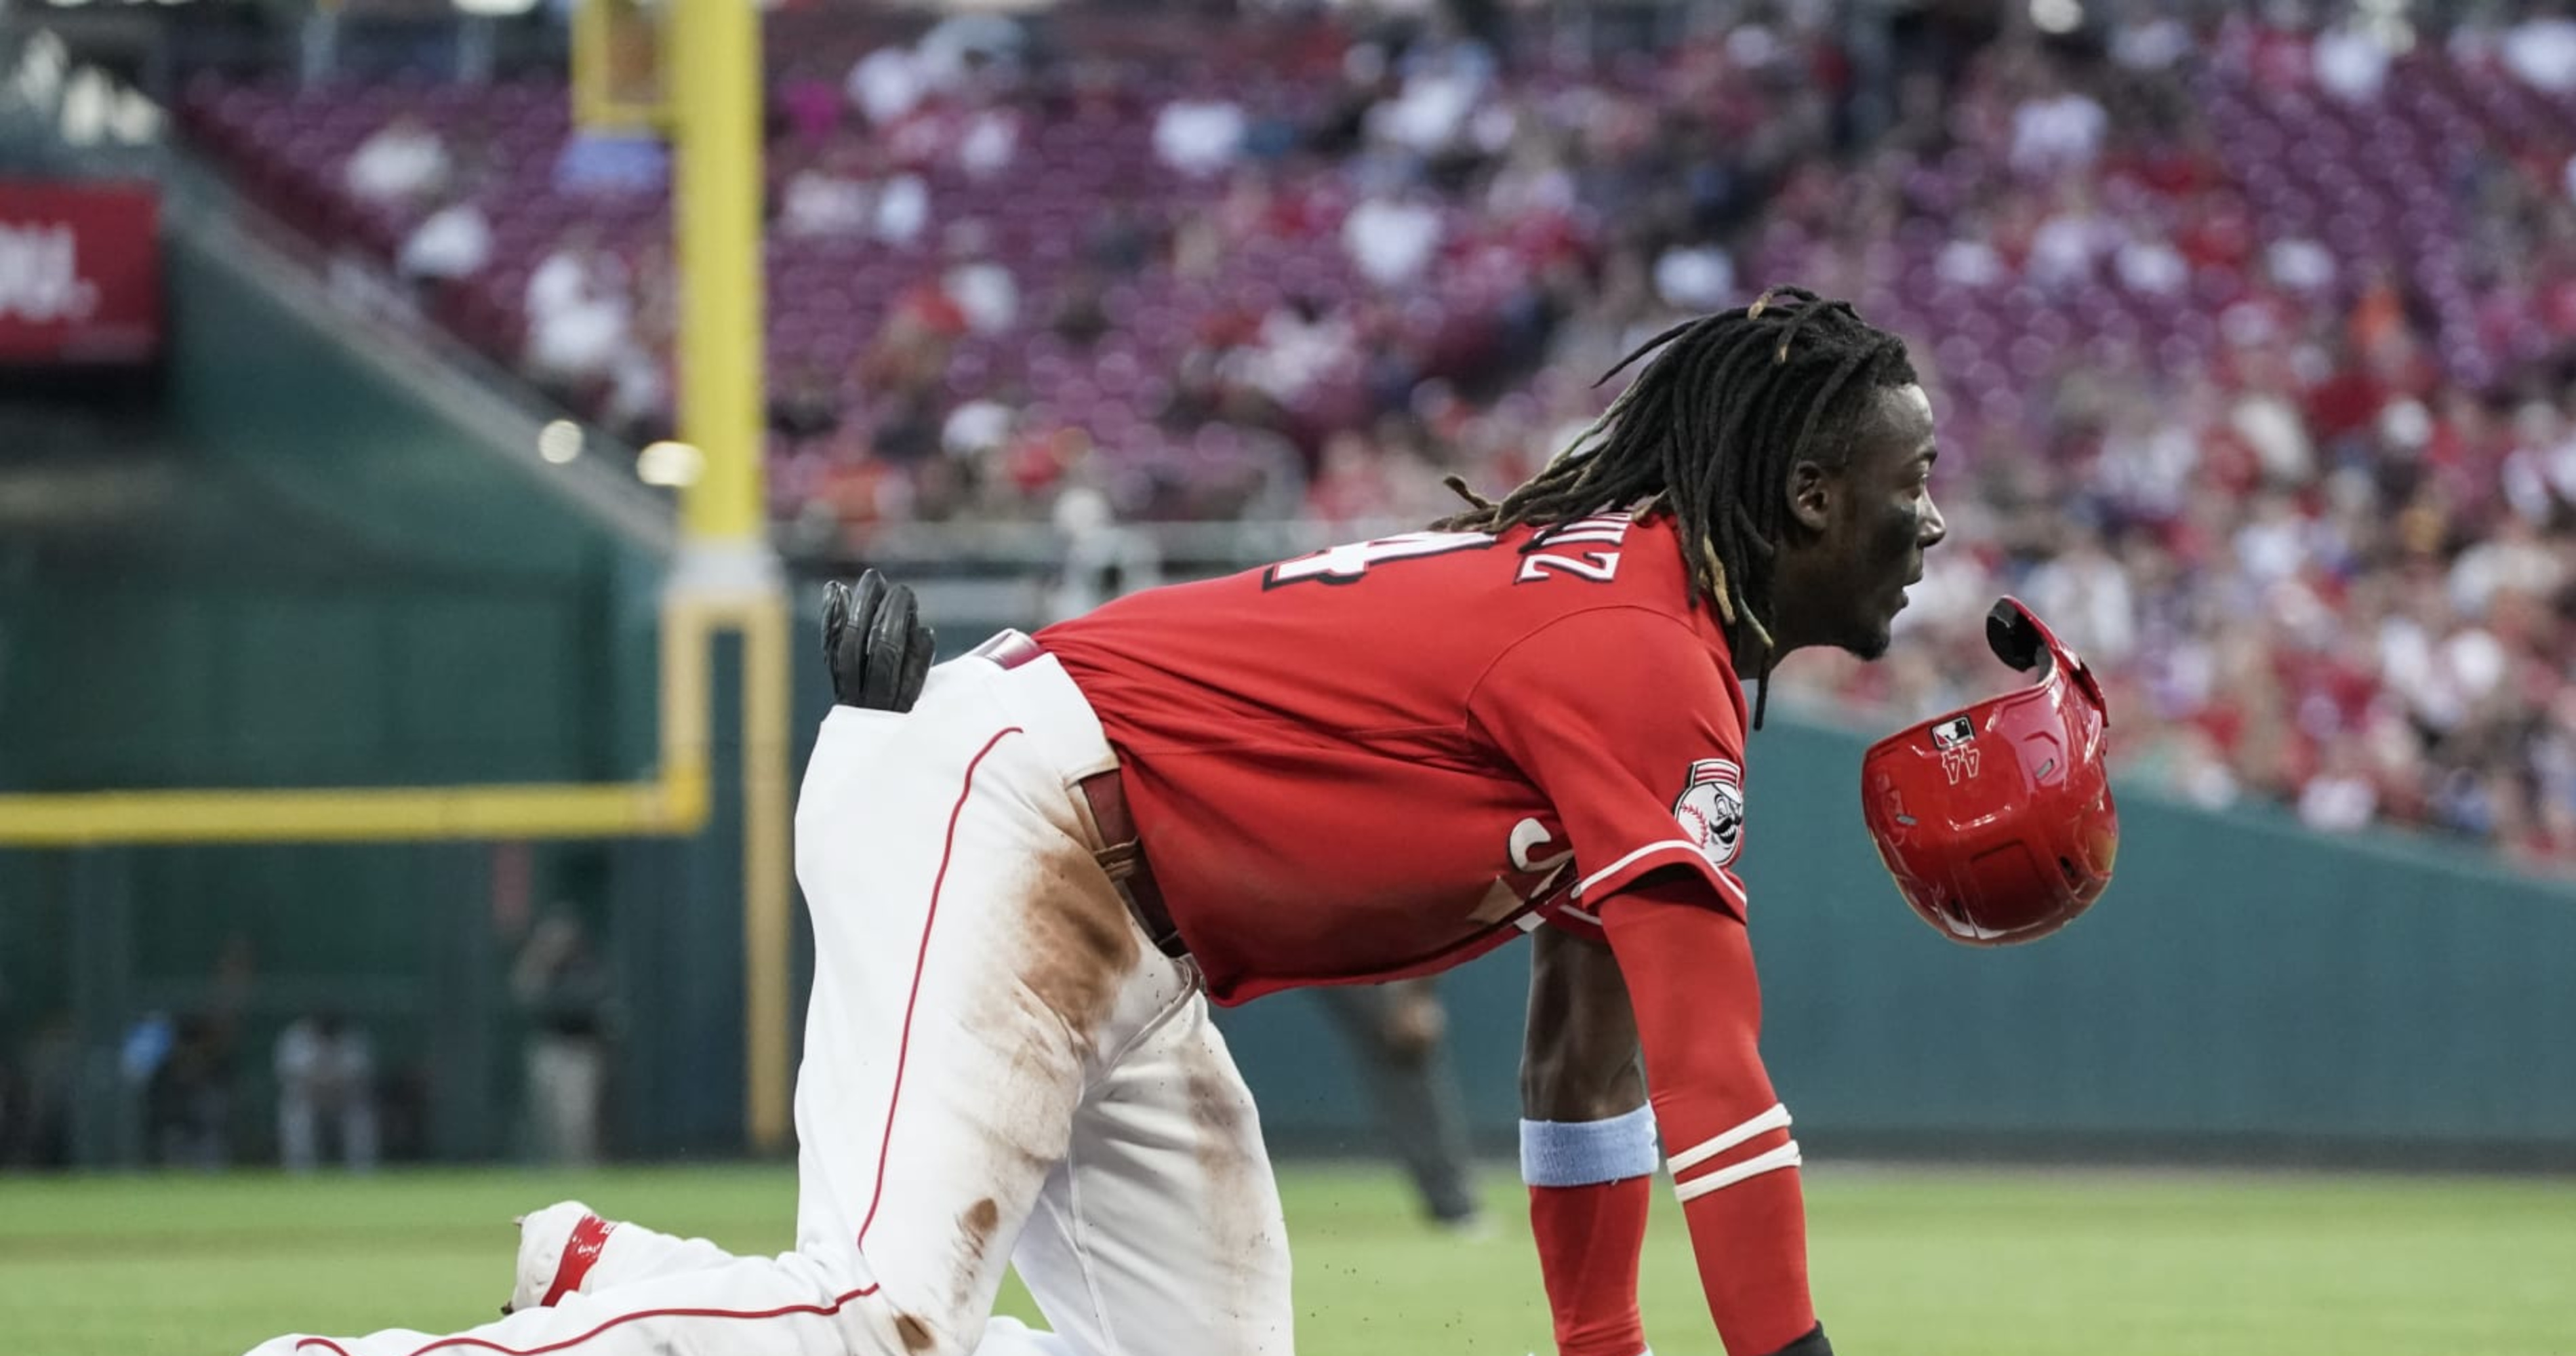 Cincinnati Reds' fans roast team's shocking loss after leading 9-0 against  the Pirates: Choke of the year